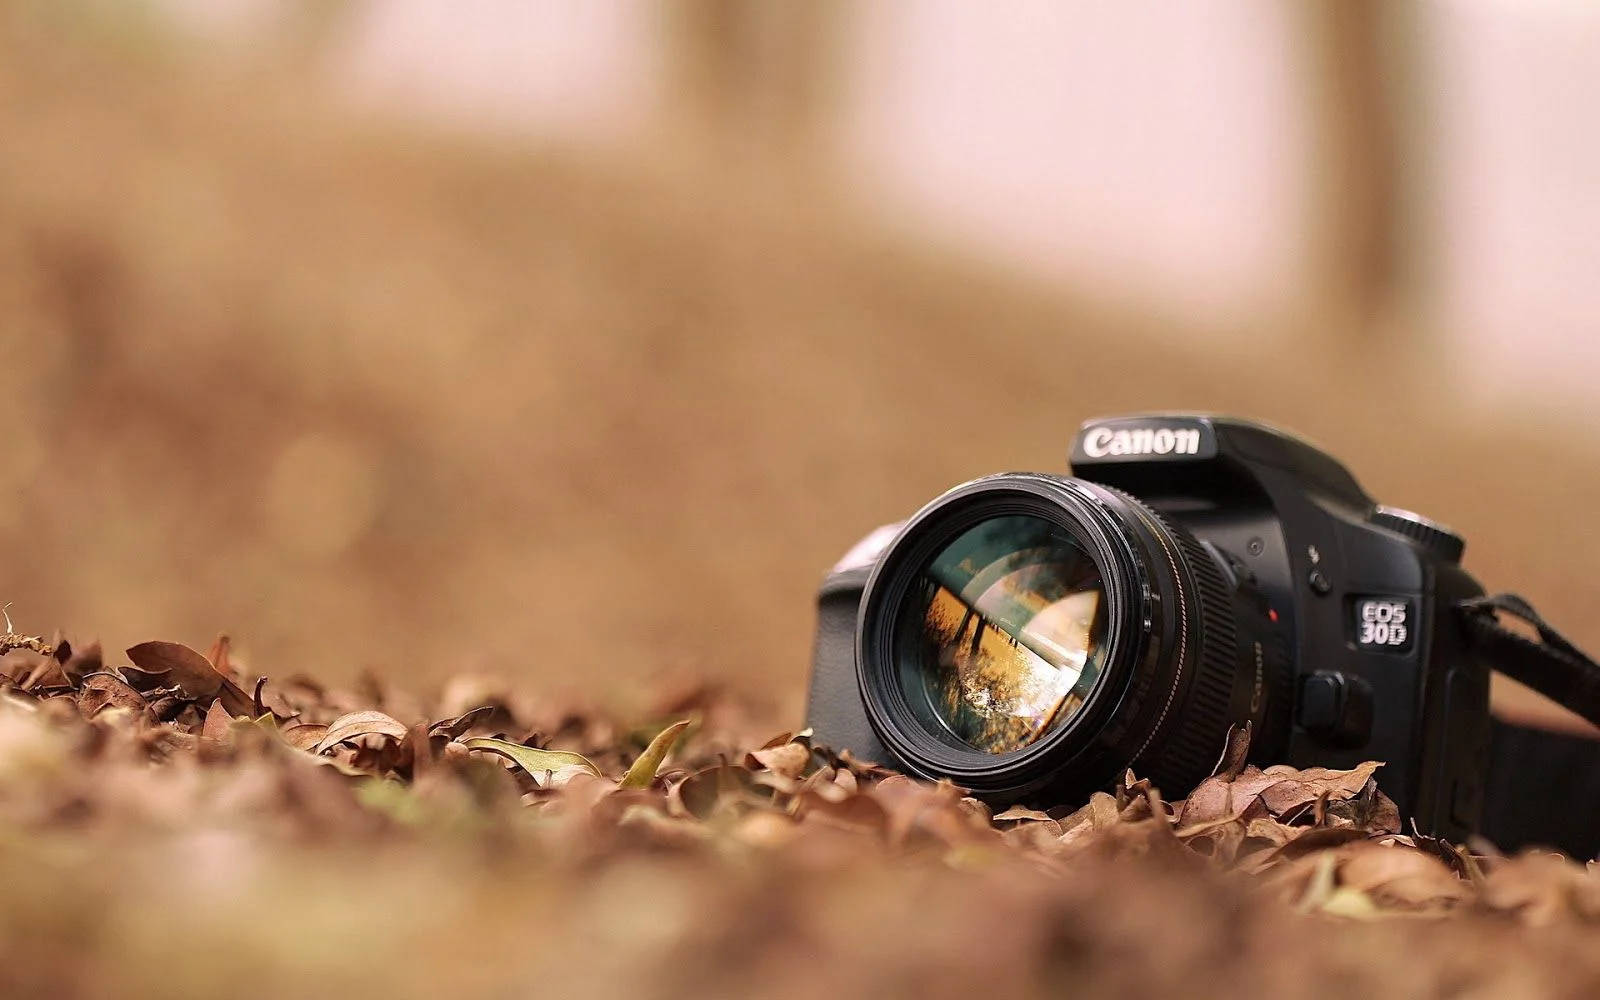 Hd Photography Of Camera By The Fallen Leaves Wallpaper